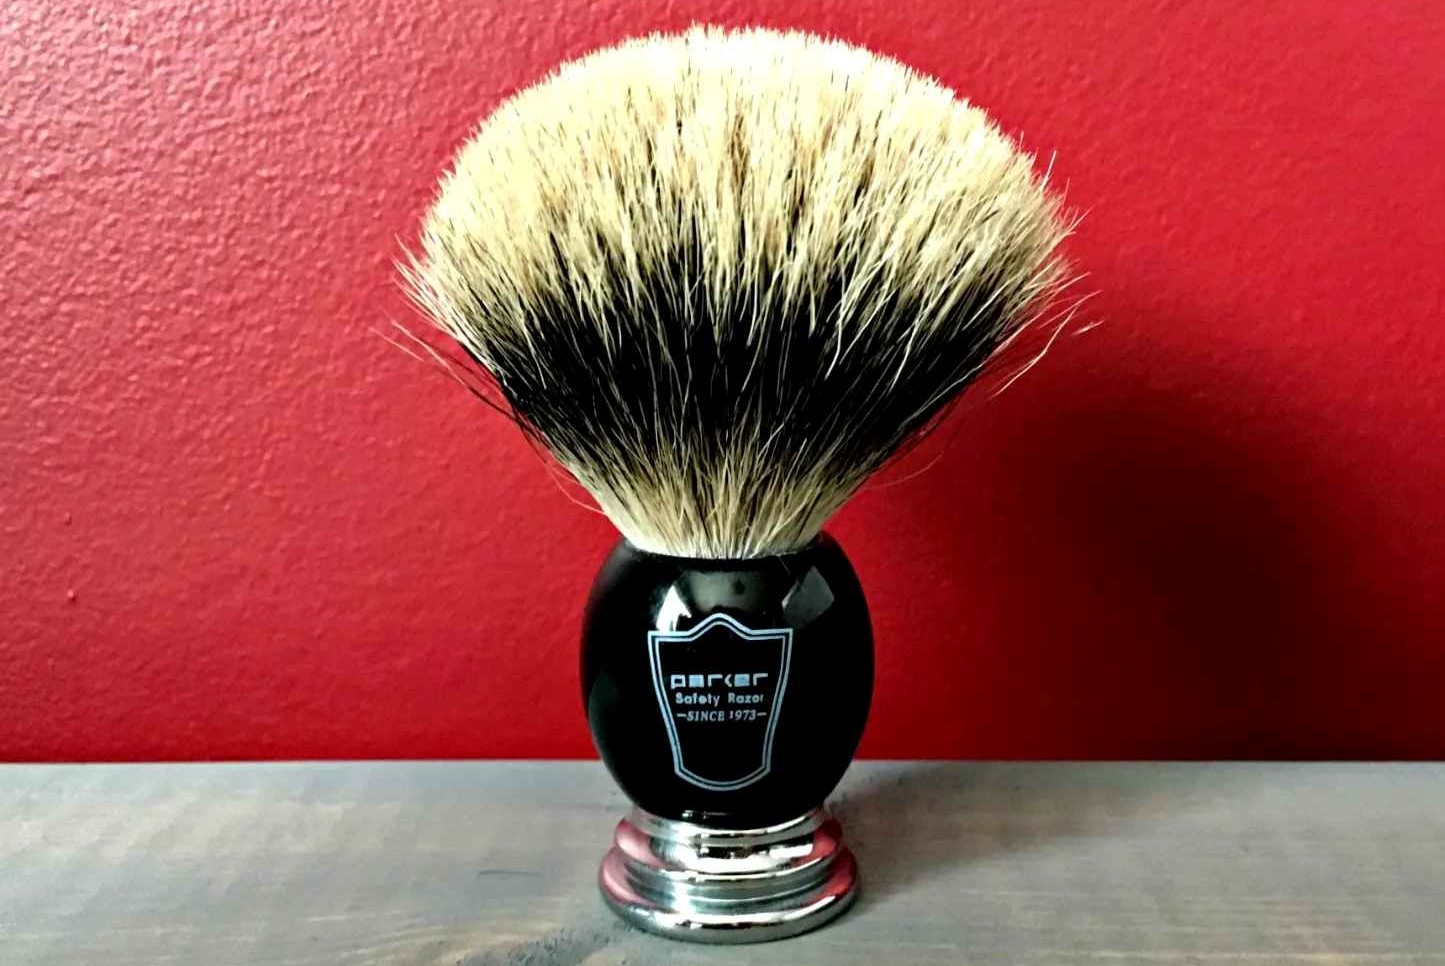 Whether badger shaving brushes smell is a big concern for many